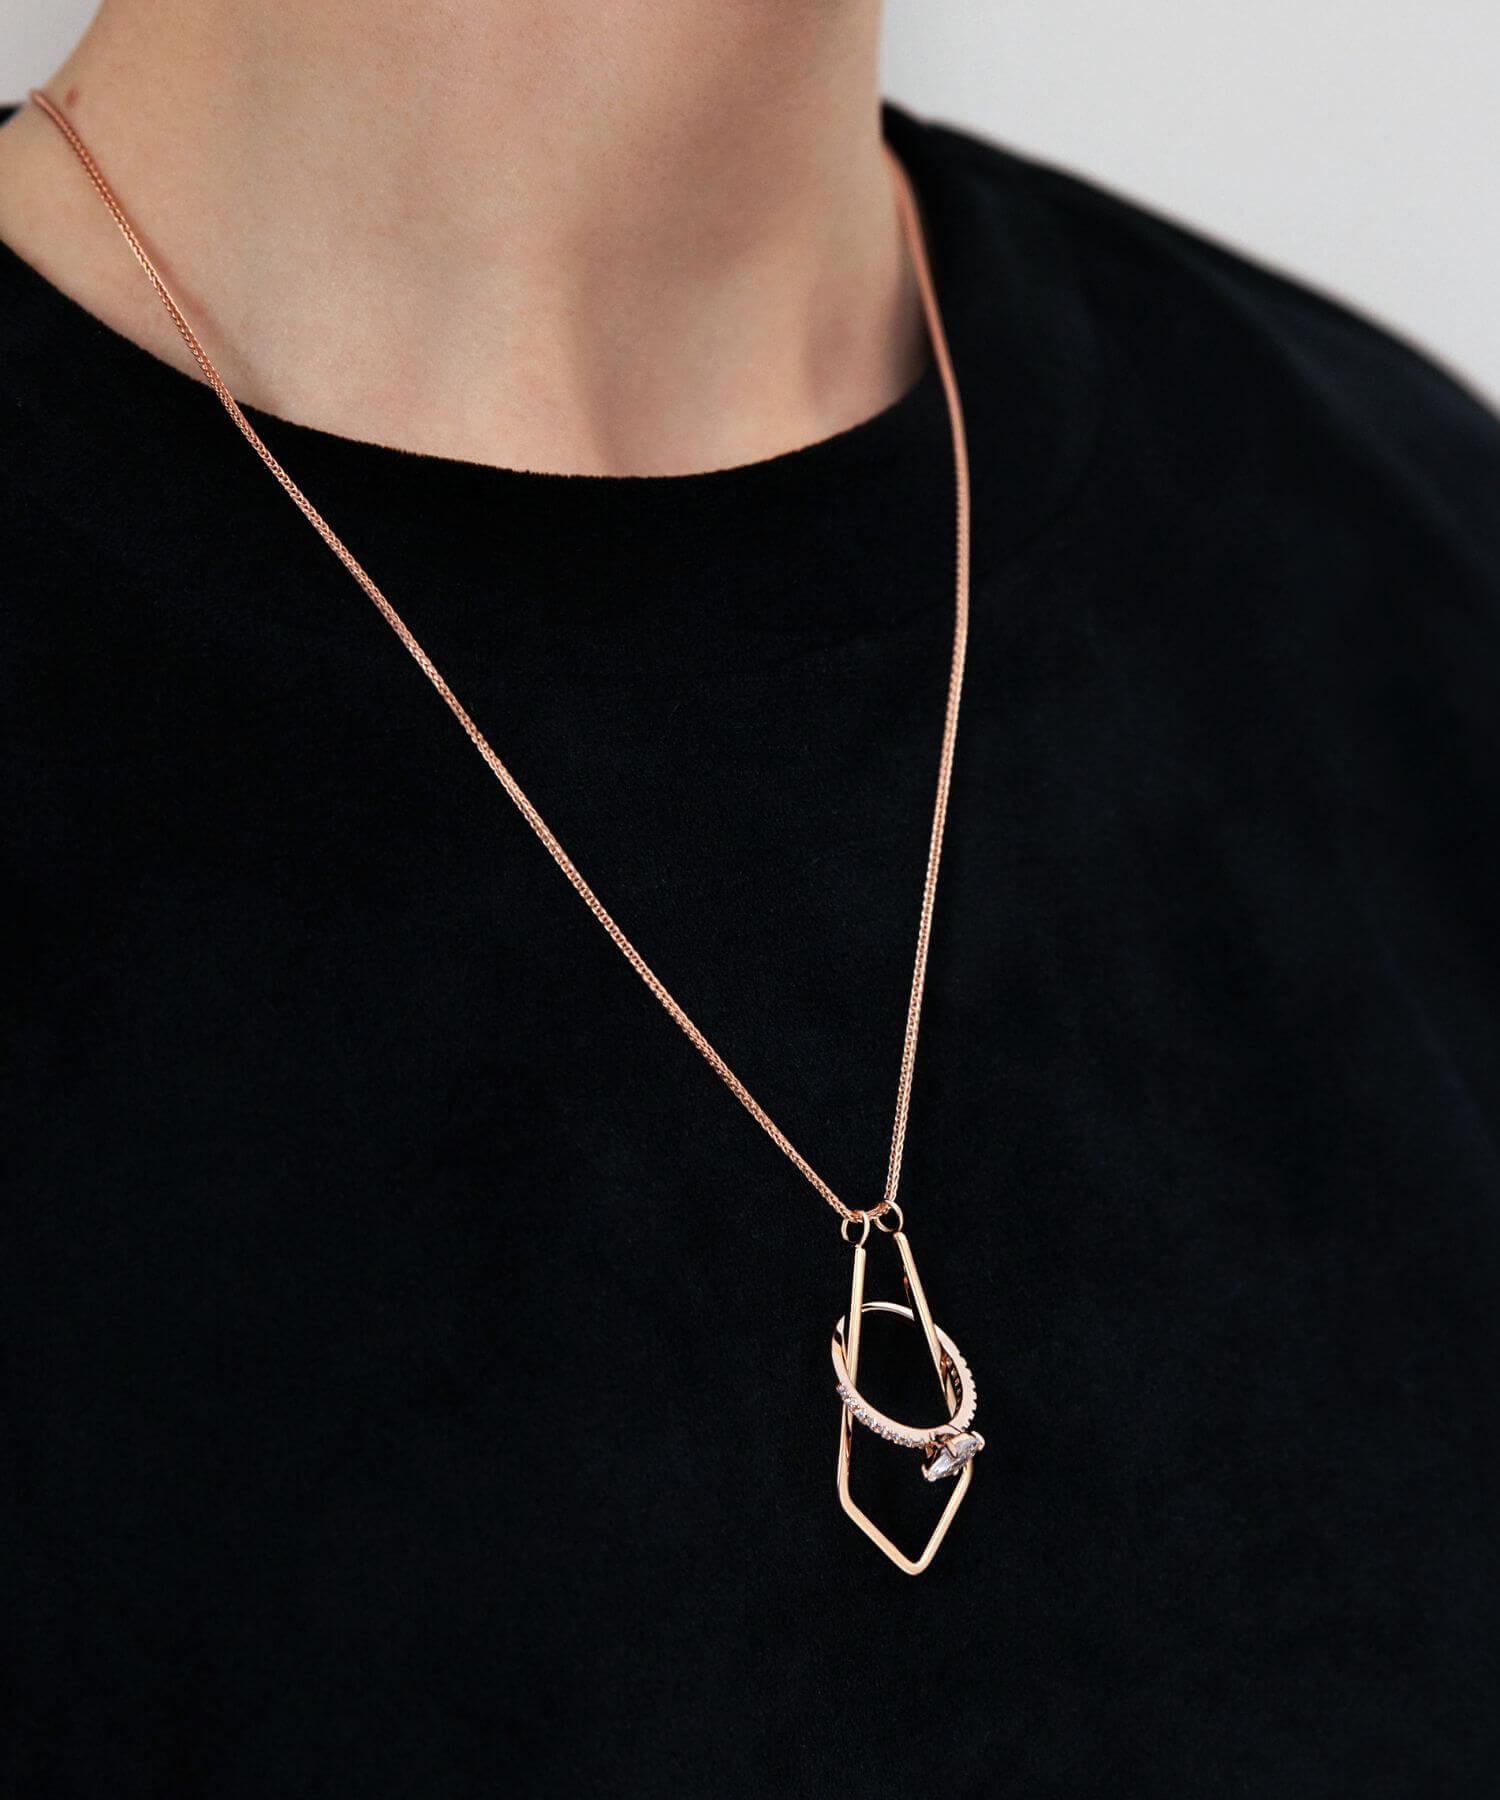 Geometric Ring Holder Necklace Silver Delicate | Fruugo NZ